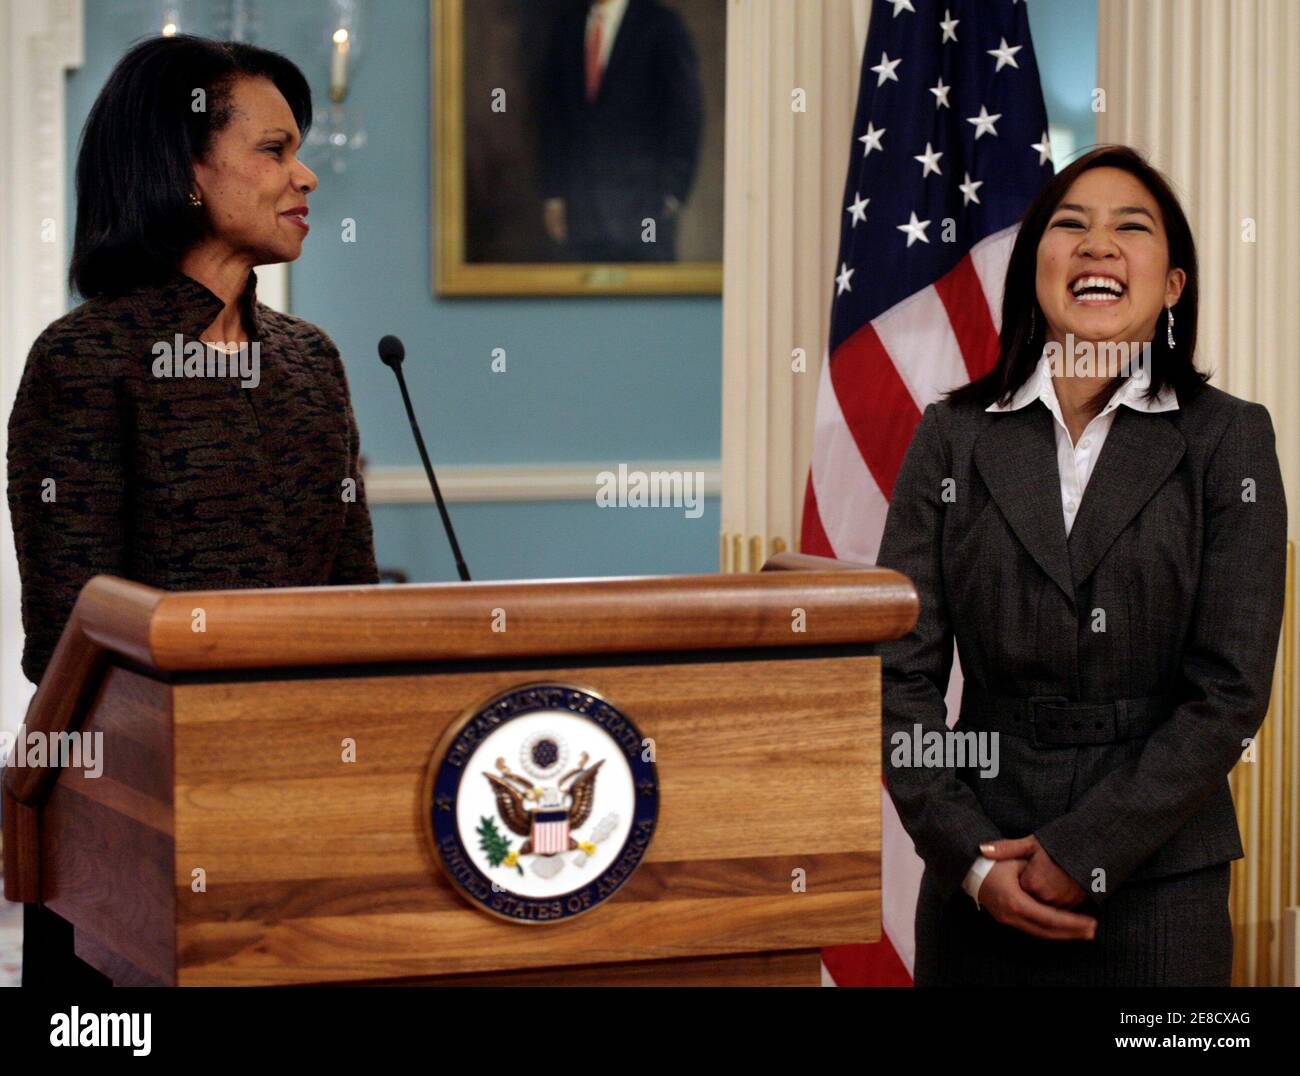 Figure skating champion Michelle Kwan (R) laughs as U.S. Secretary of State Condoleezza Rice speaks at the Treaty Room of the State Department in Washington November 9, 2006. Rice named Kwan the public diplomacy ambassador to represent American values especially to young people and sports enthusiasts. REUTERS/Yuri Gripas  (UNITED STATES) Stock Photo